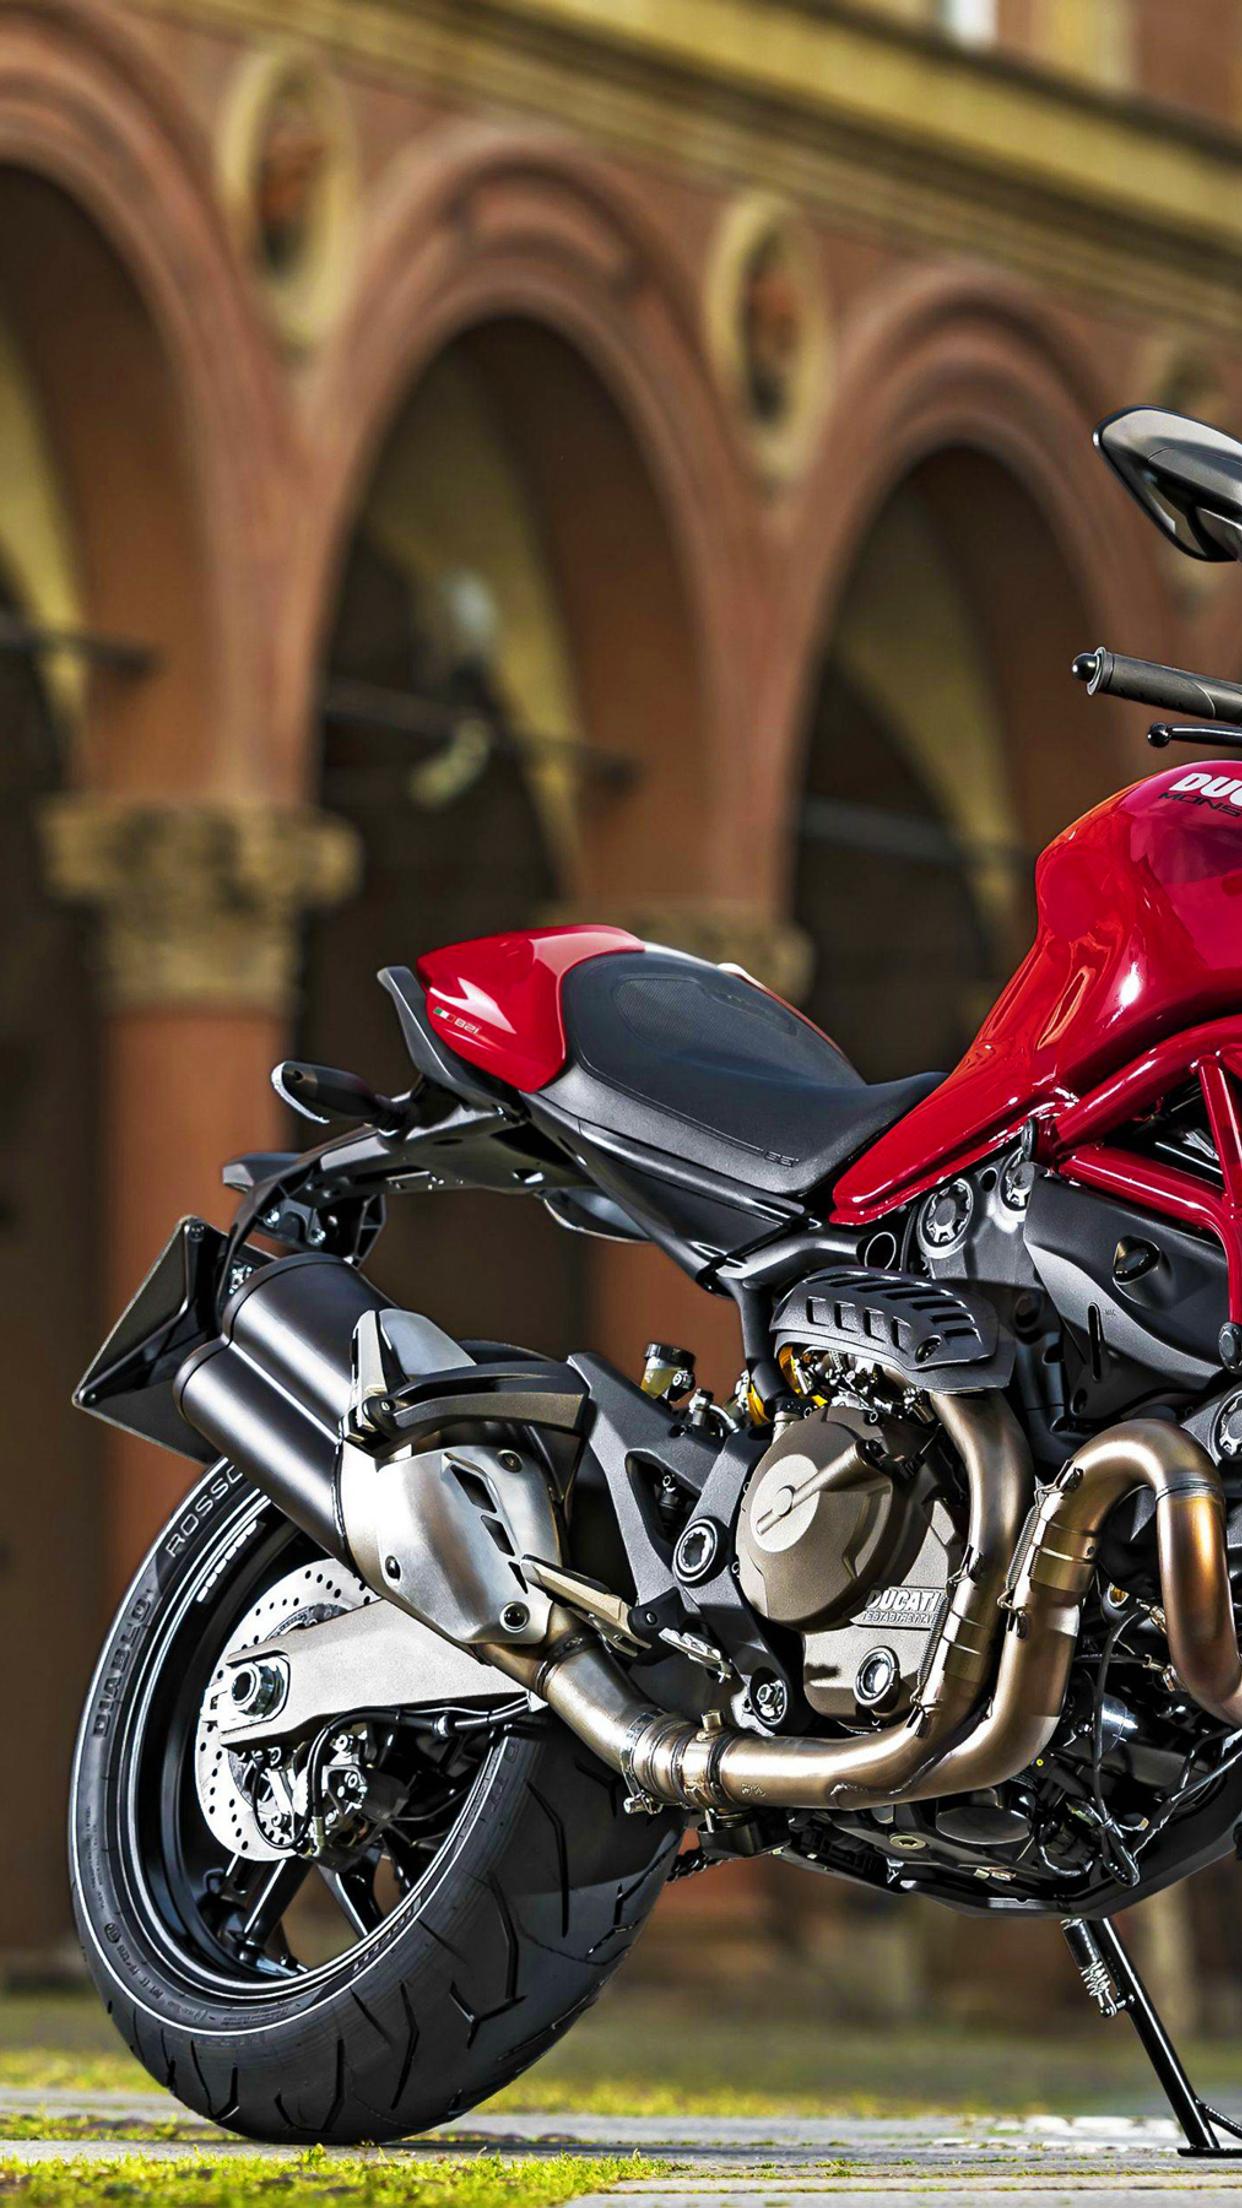 Ducati Monster 821 - red and black motorcycle